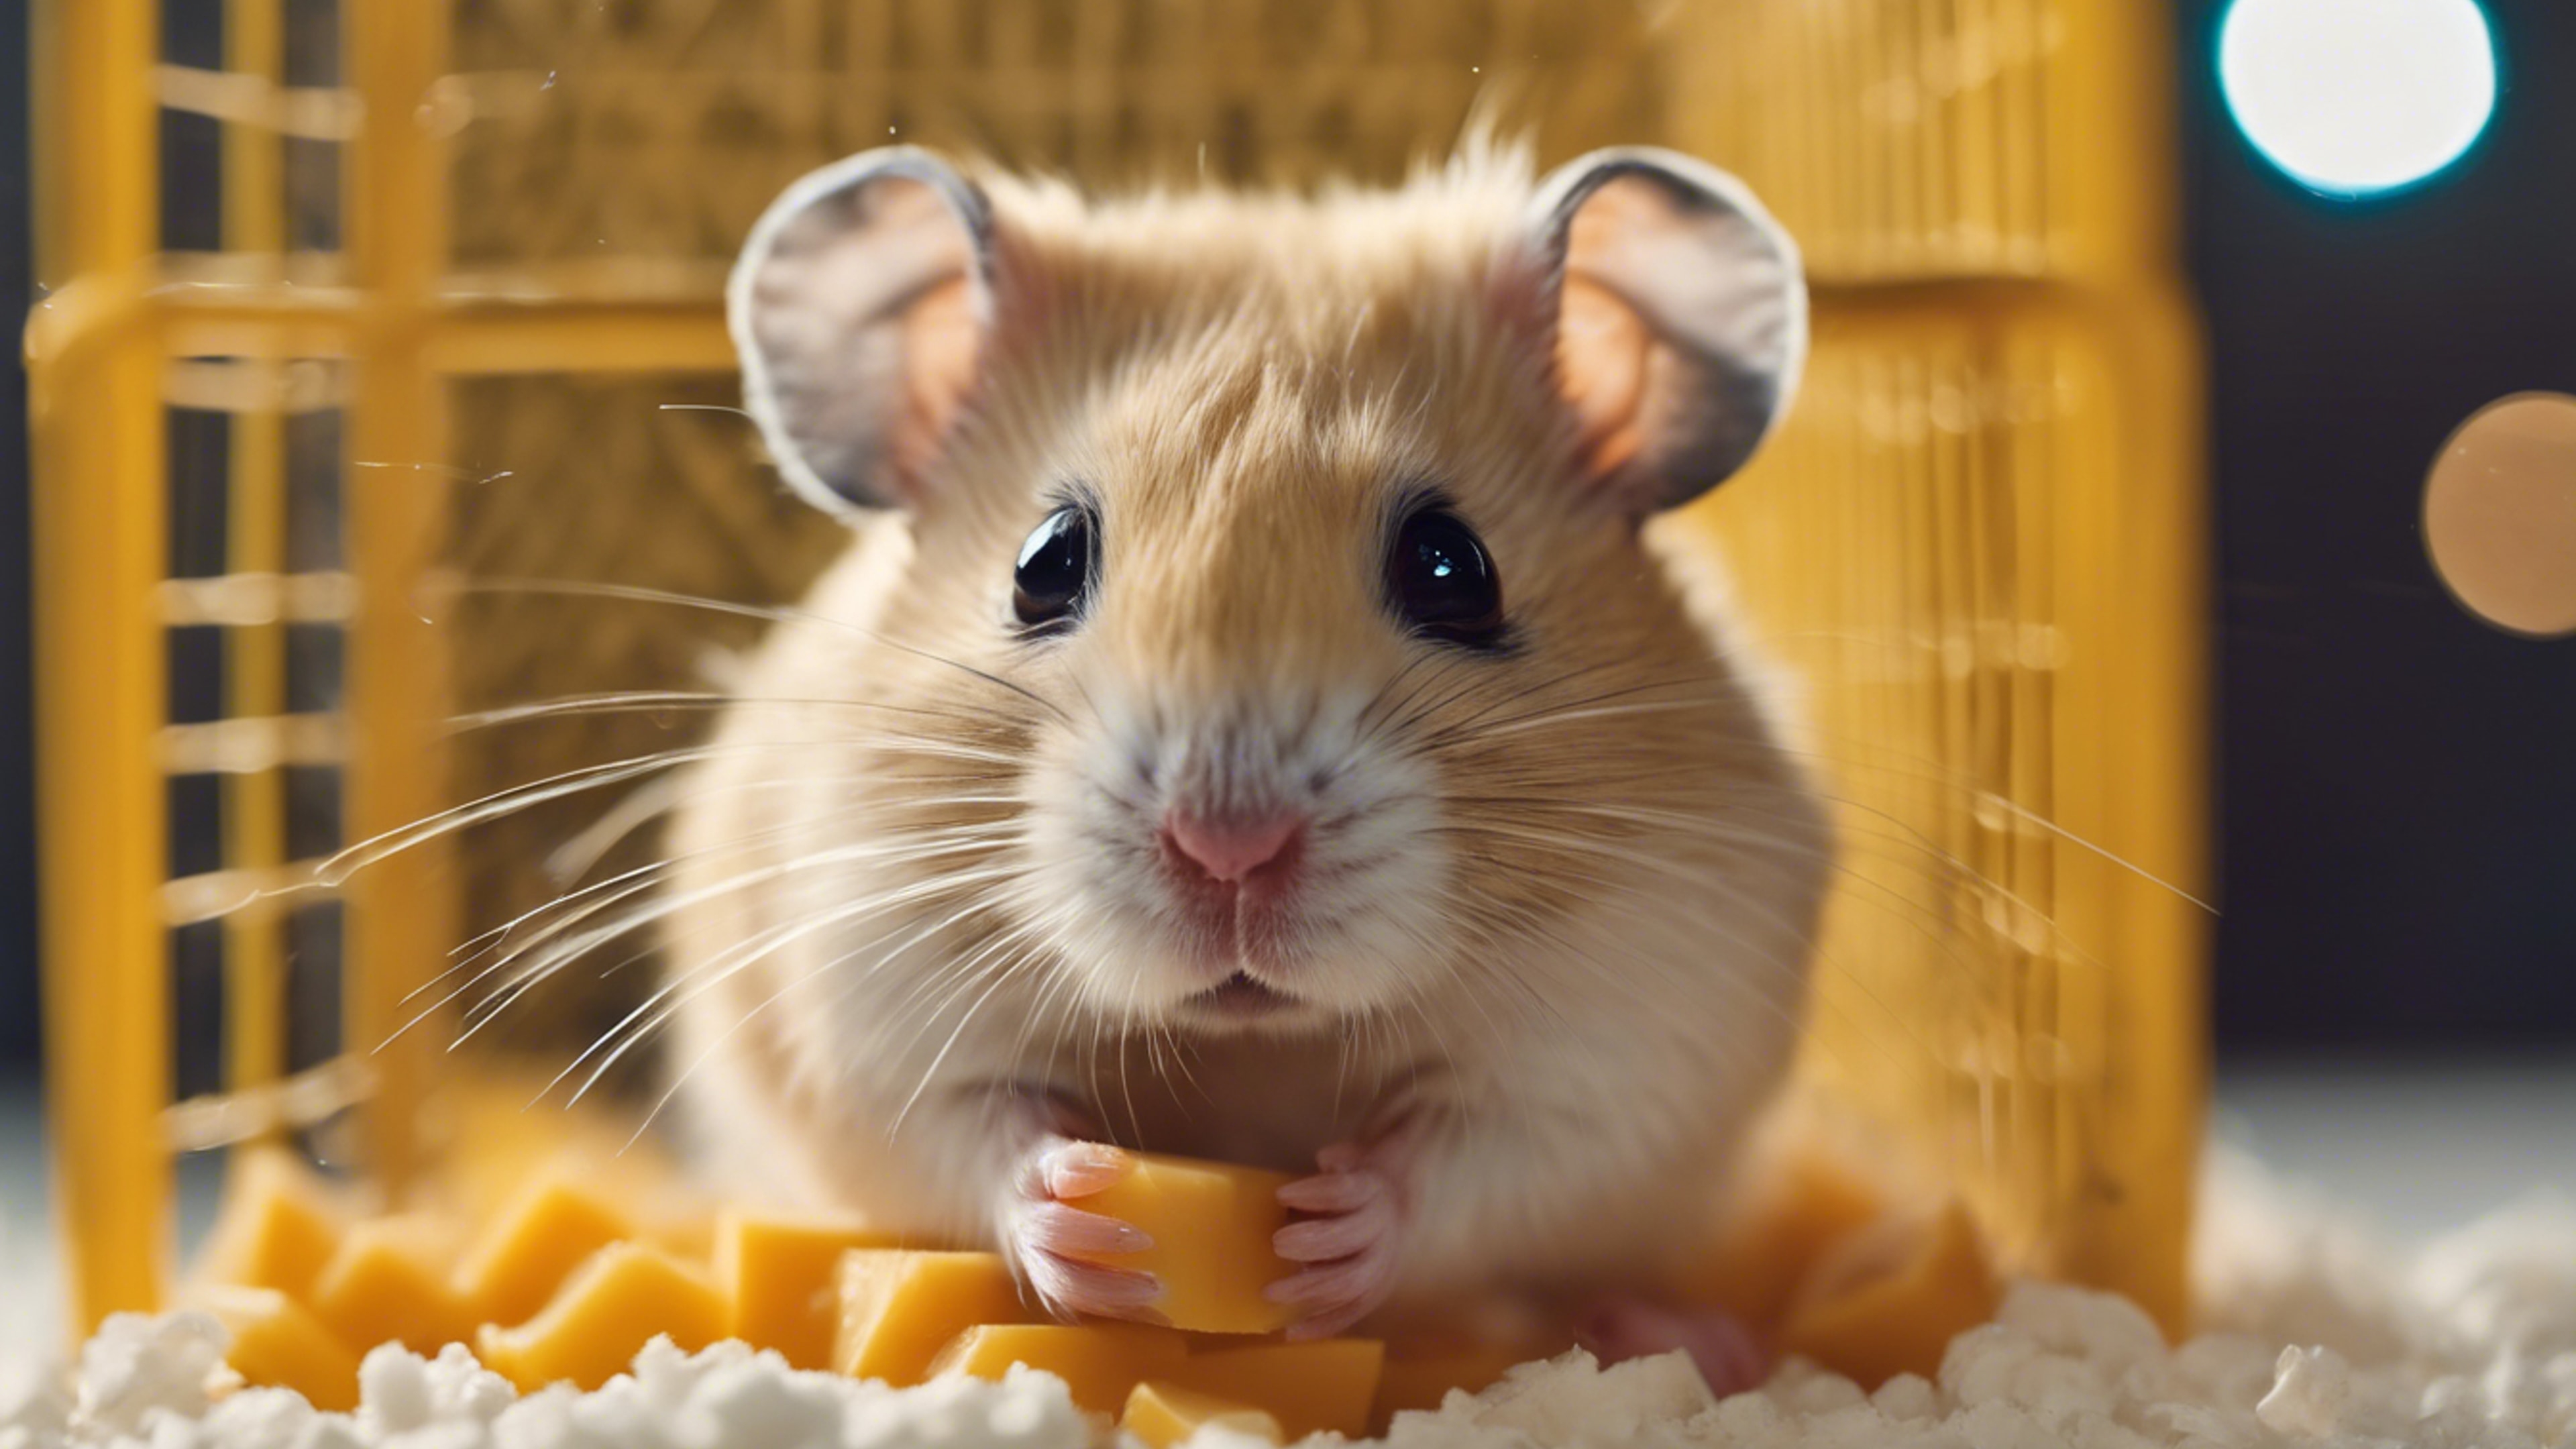 An endearing beige hamster with sparkling eyes, nibbling on a tiny piece of cheese in a yellow hamster cage. Wallpaper[4ffd7b8c142e44e1a302]